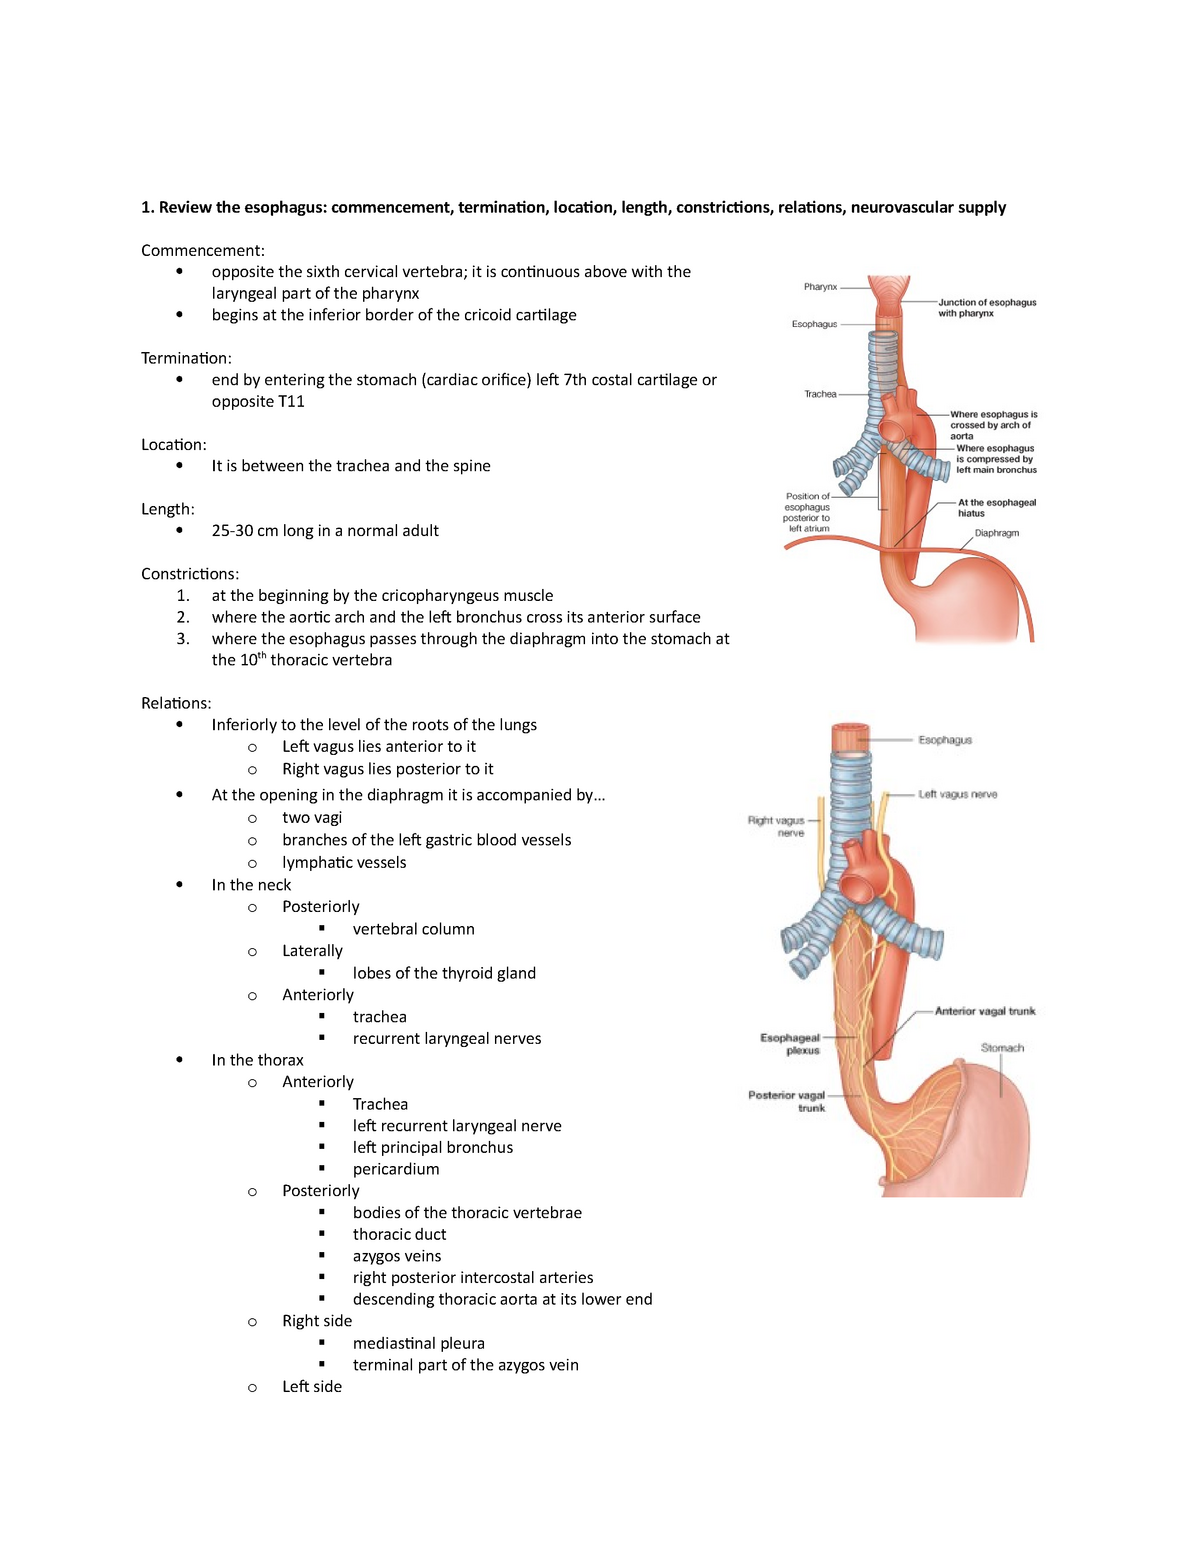 esophagus constrictions